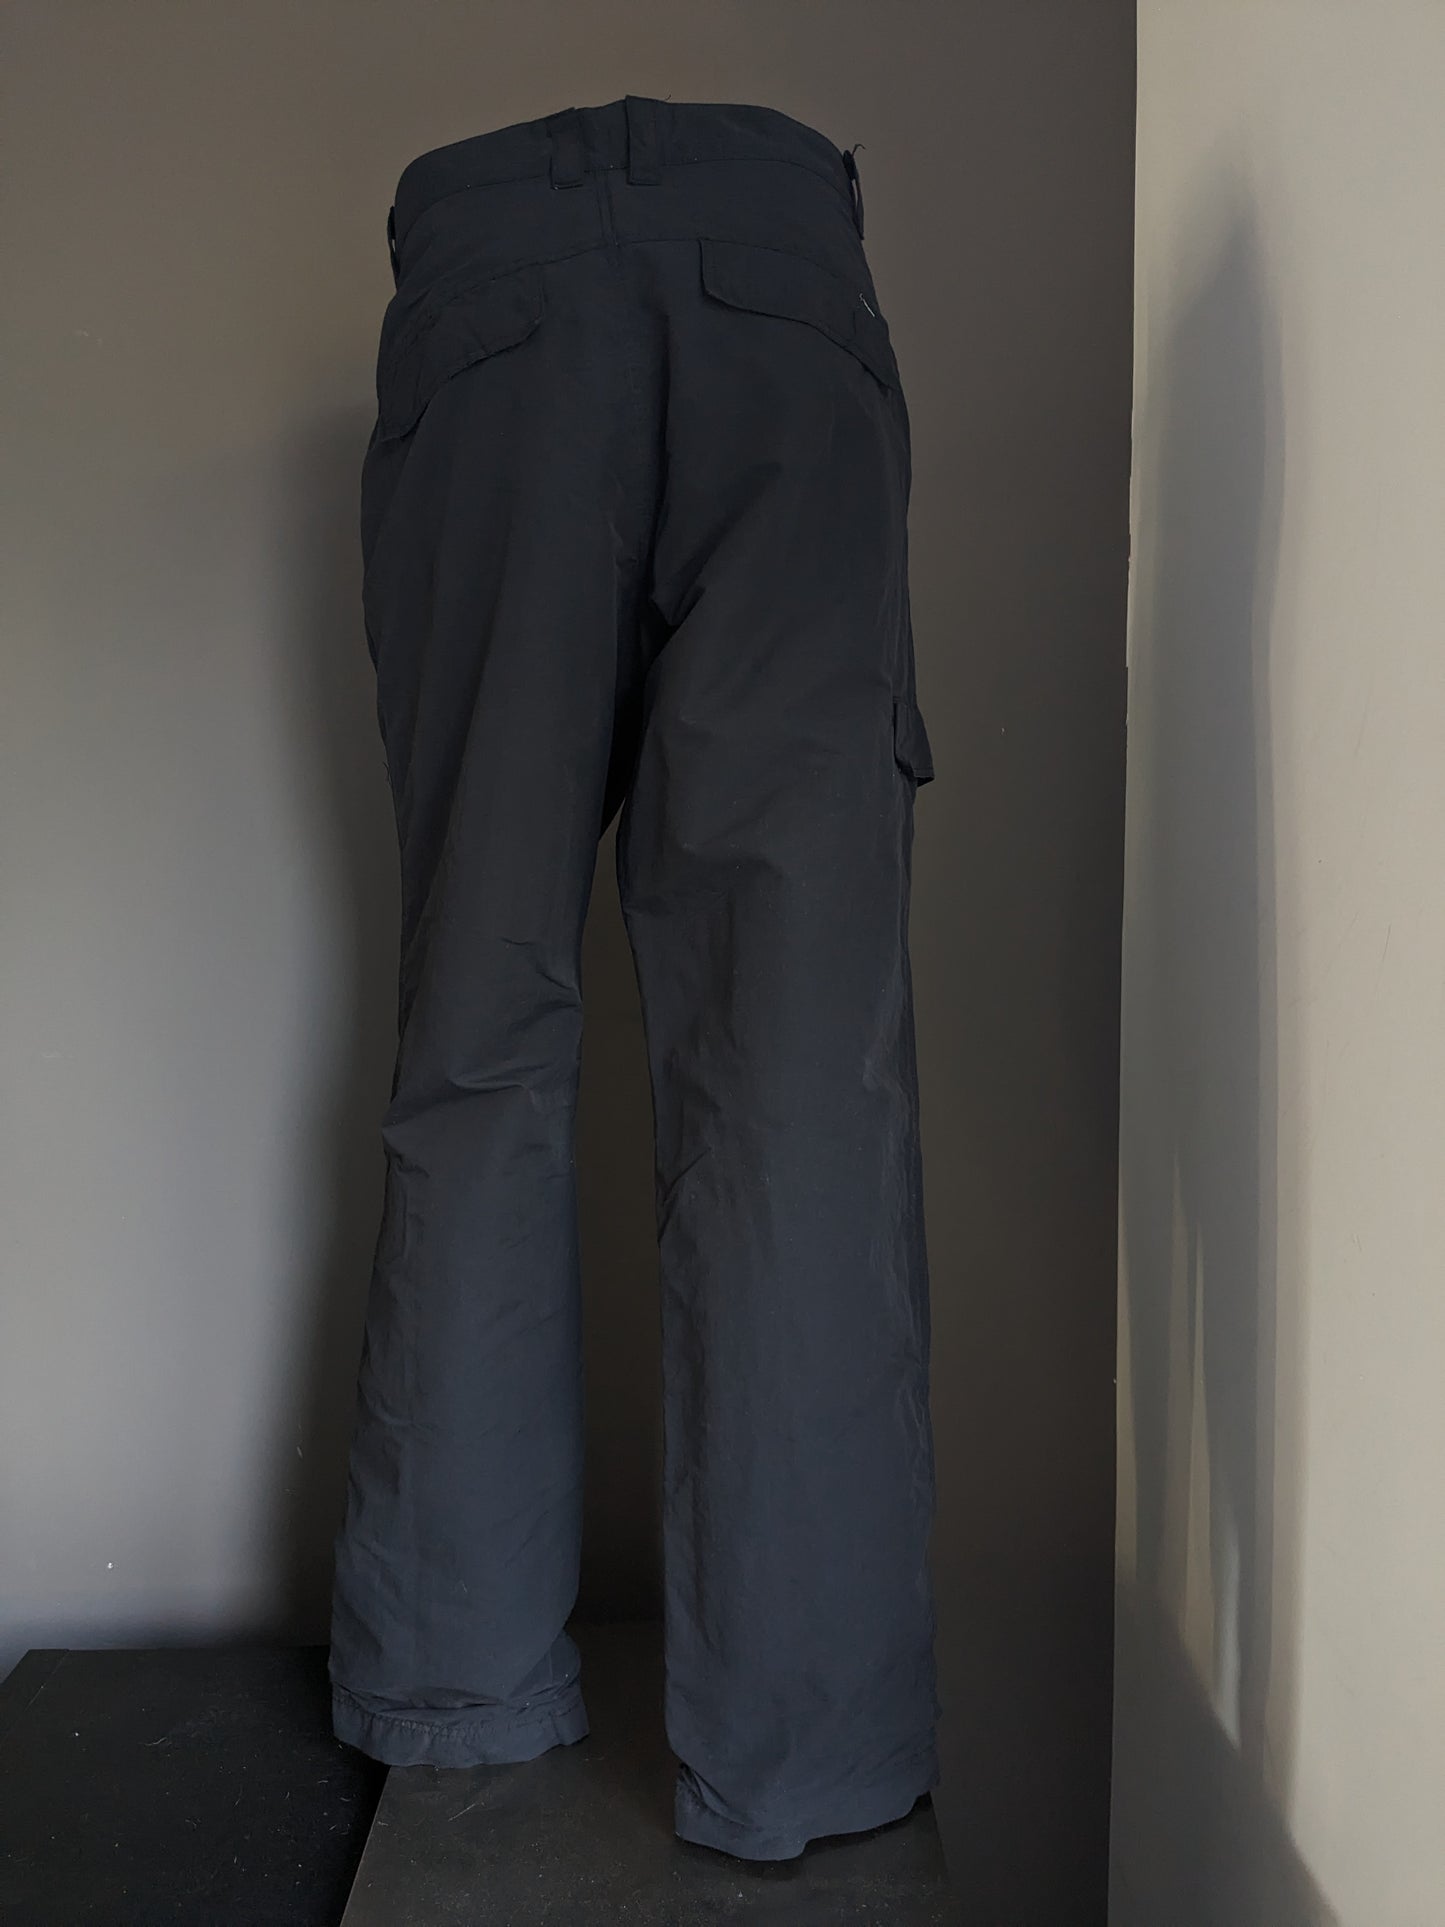 Tenson Outdoor trousers. Soft warm lining. Colored black. Size 54 / L.